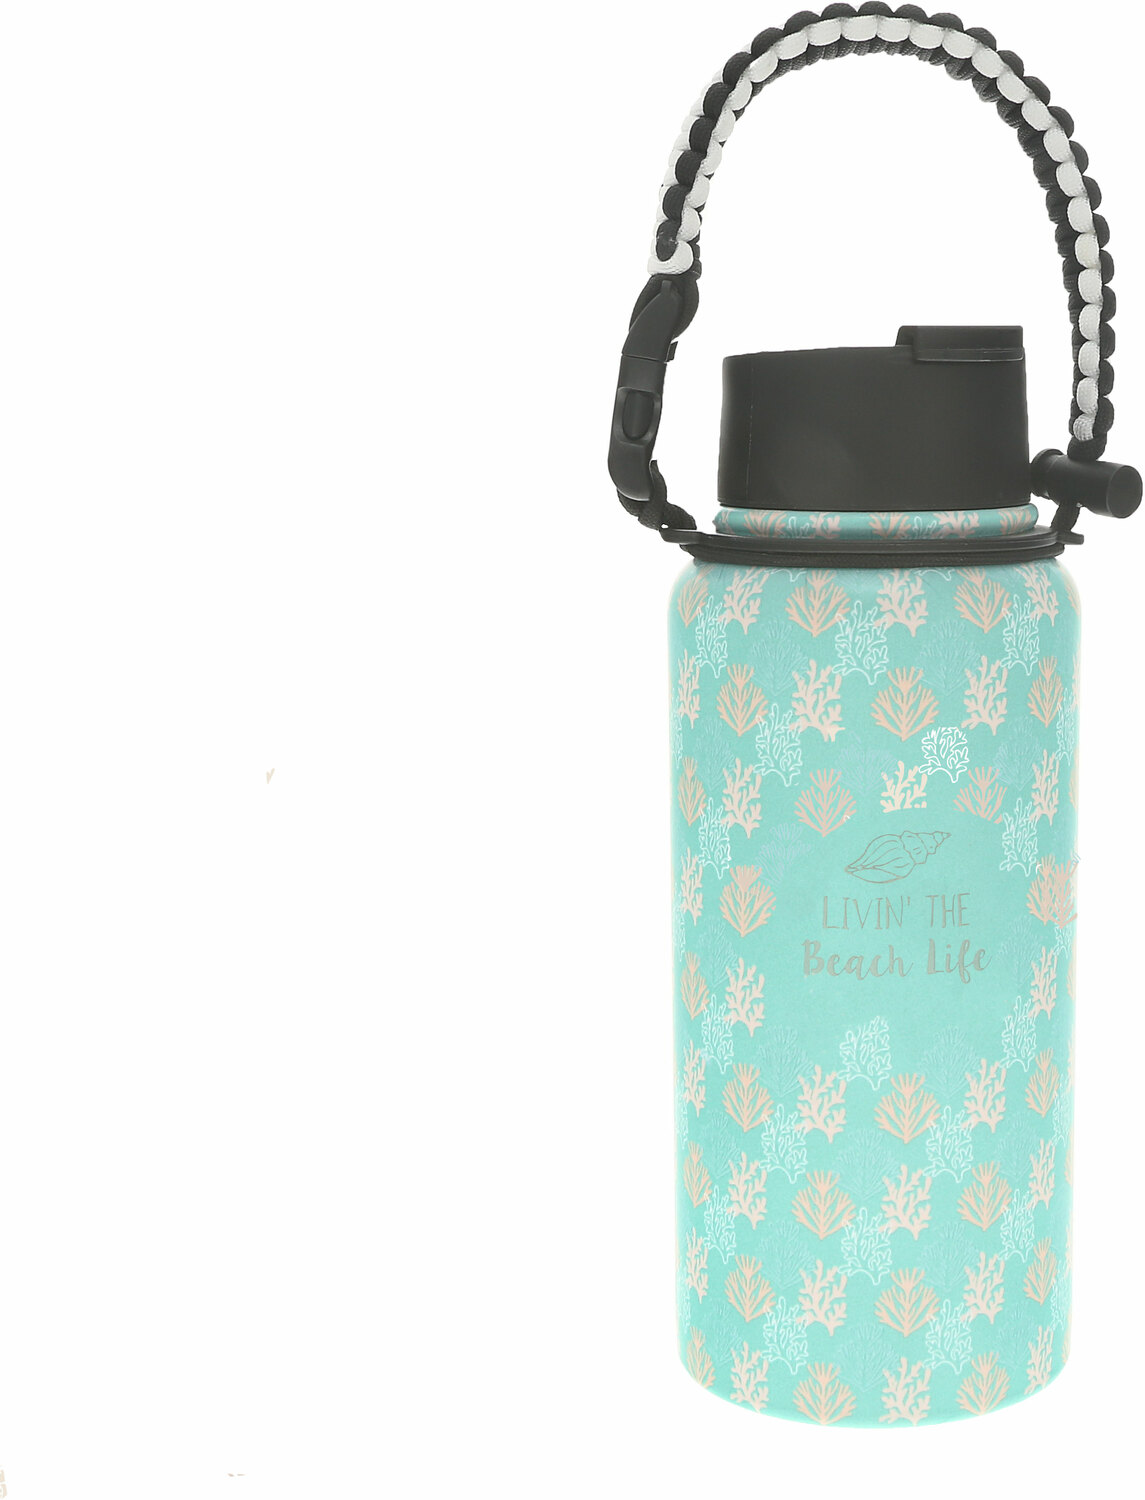 Beach Life by We People - Beach Life - 32 oz Stainless Steel Water Bottle with Paracord Survival Handle